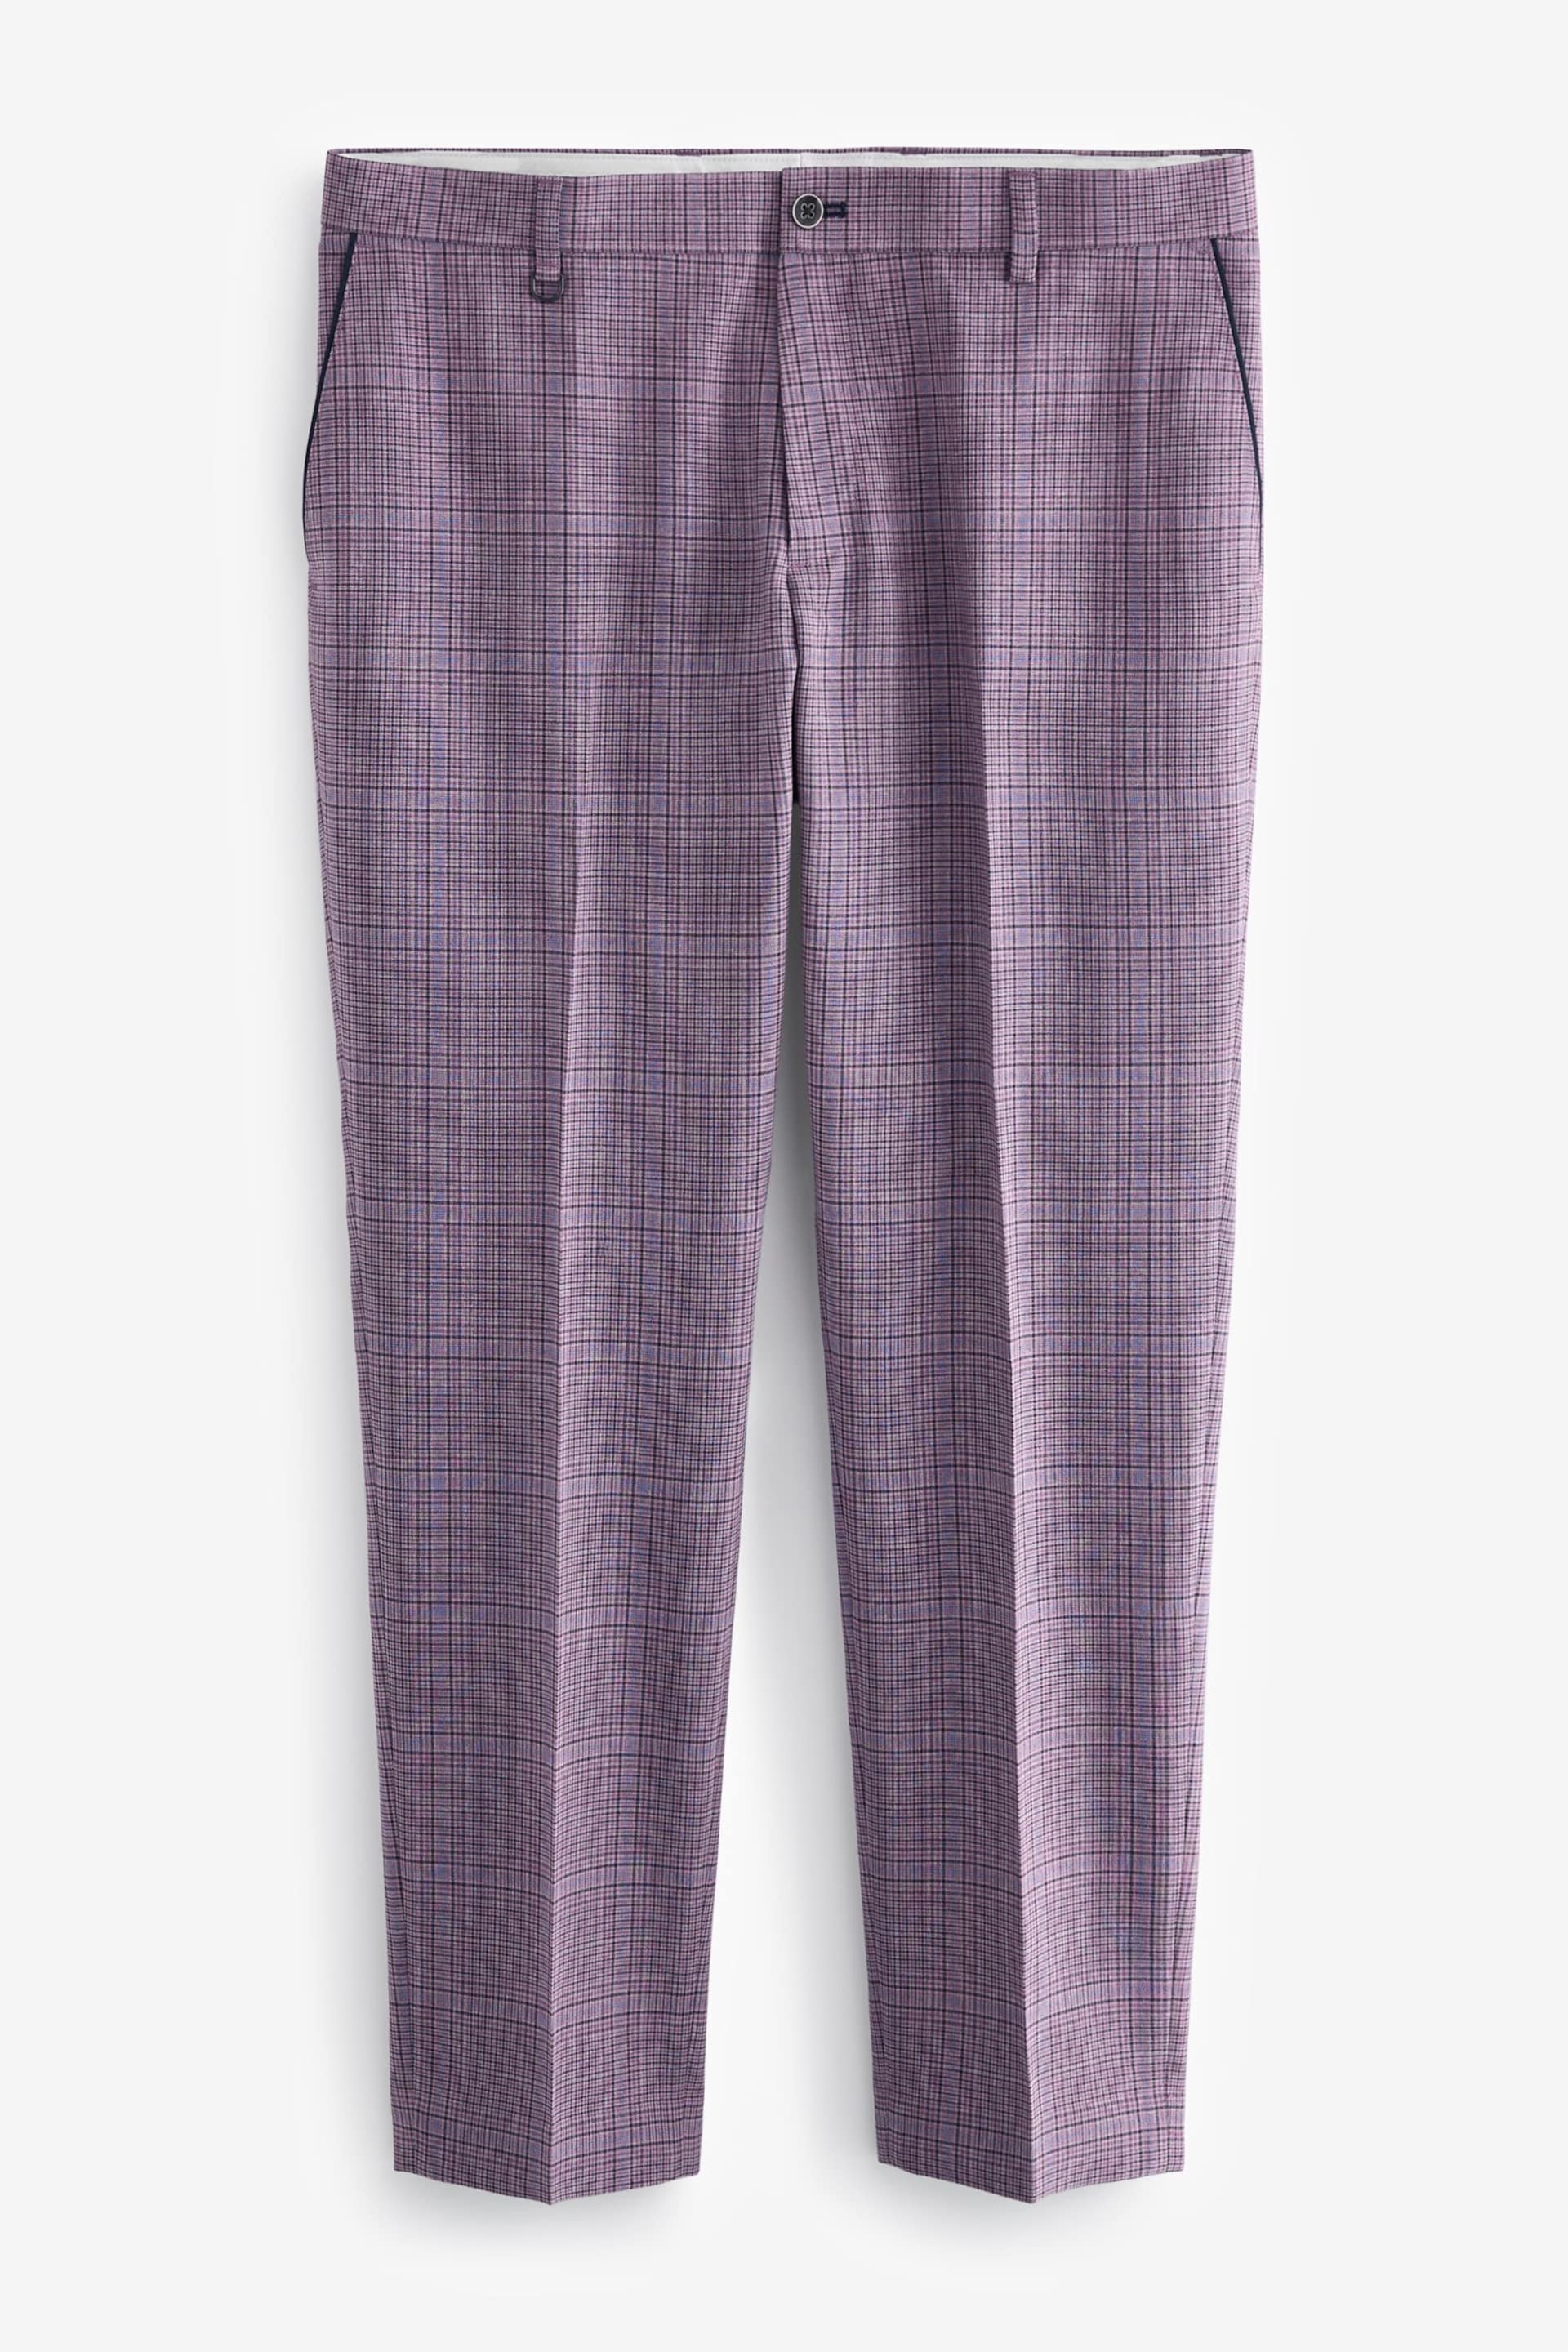 Pink Slim Fit Check Smart Trousers - Image 6 of 9